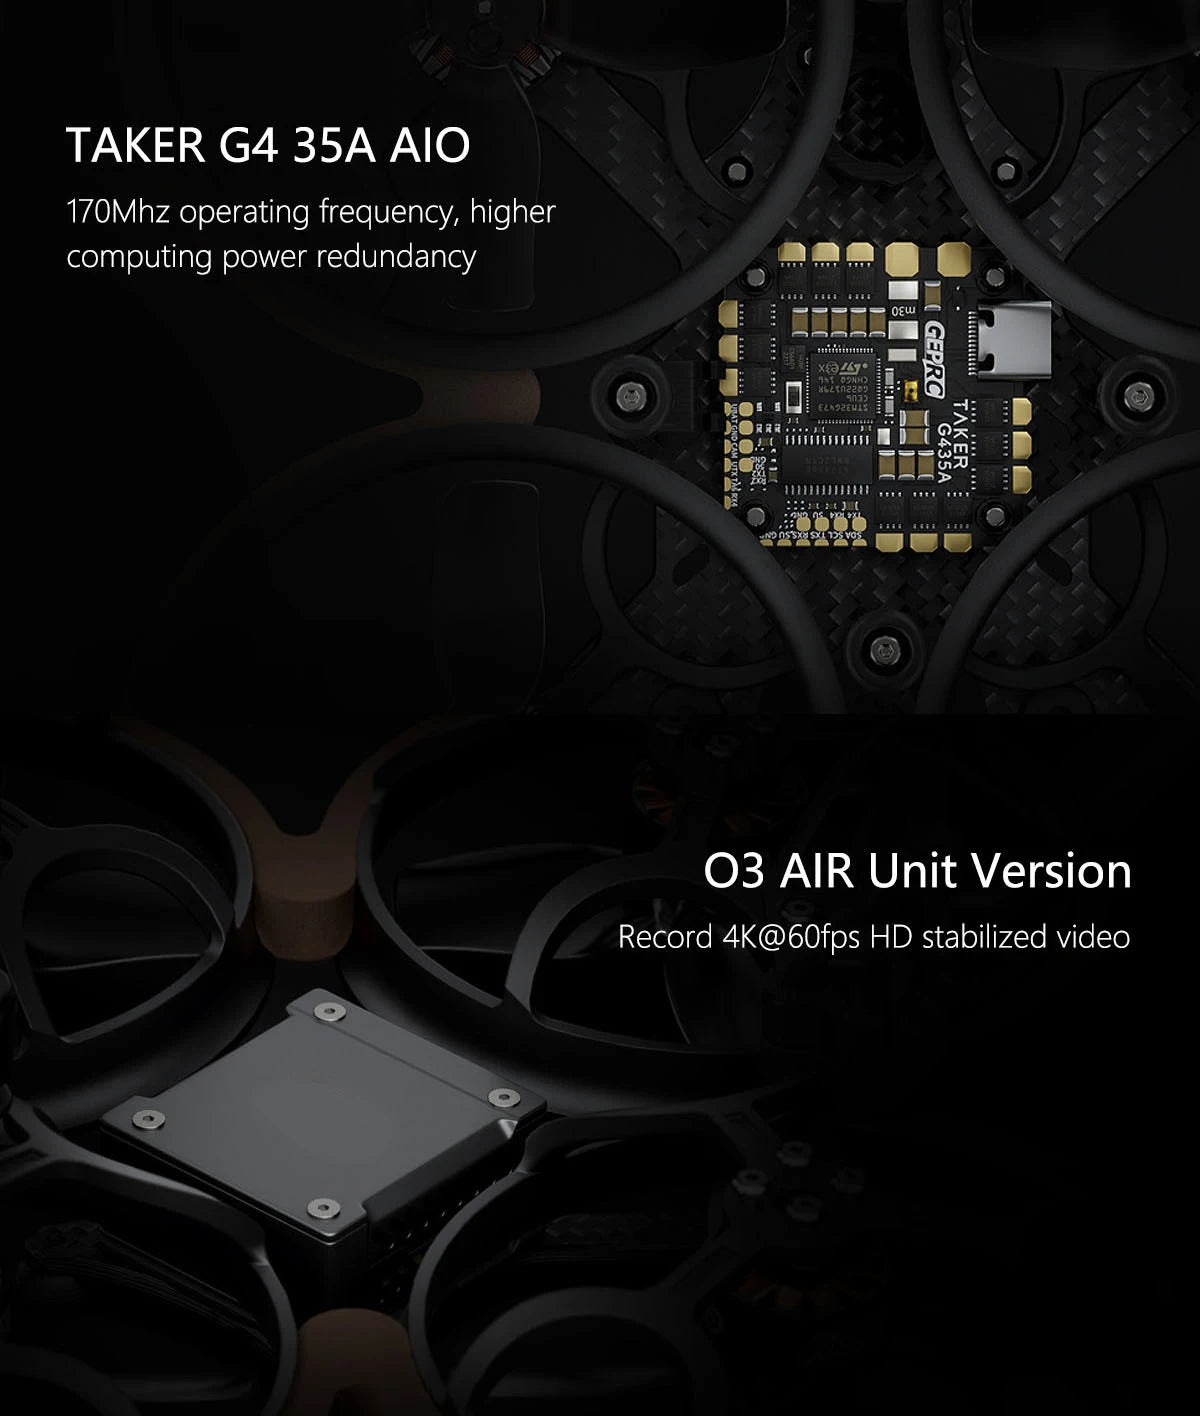 GEPRC Cinelog25 V2 HD O3 FPV, TAKER 64 35A AIO 17OMhz operating frequency, higher computing power red